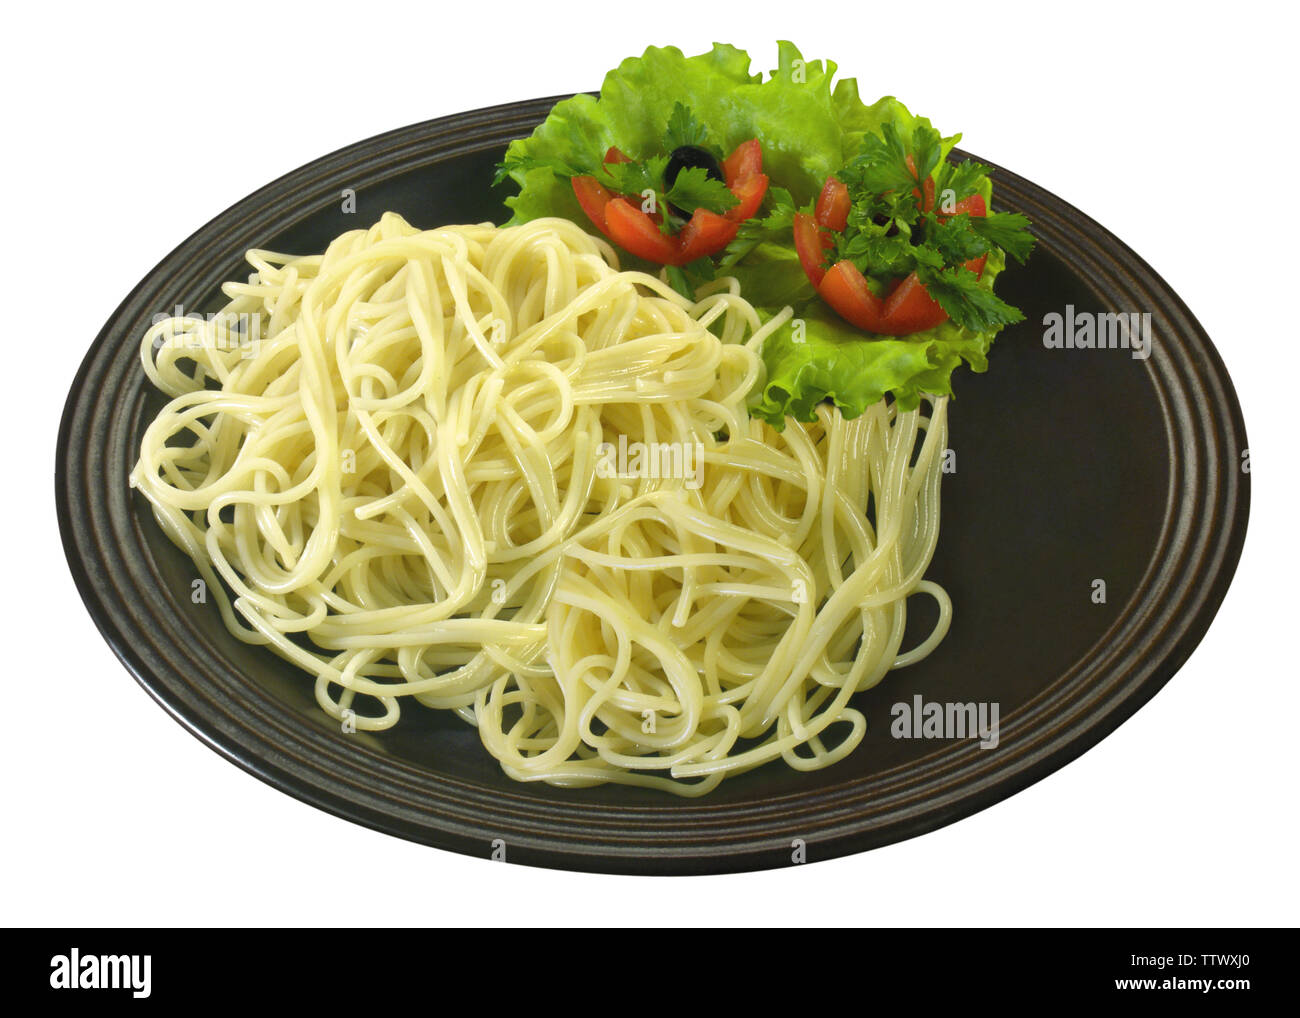 Spaghetti served in a plate Stock Photo